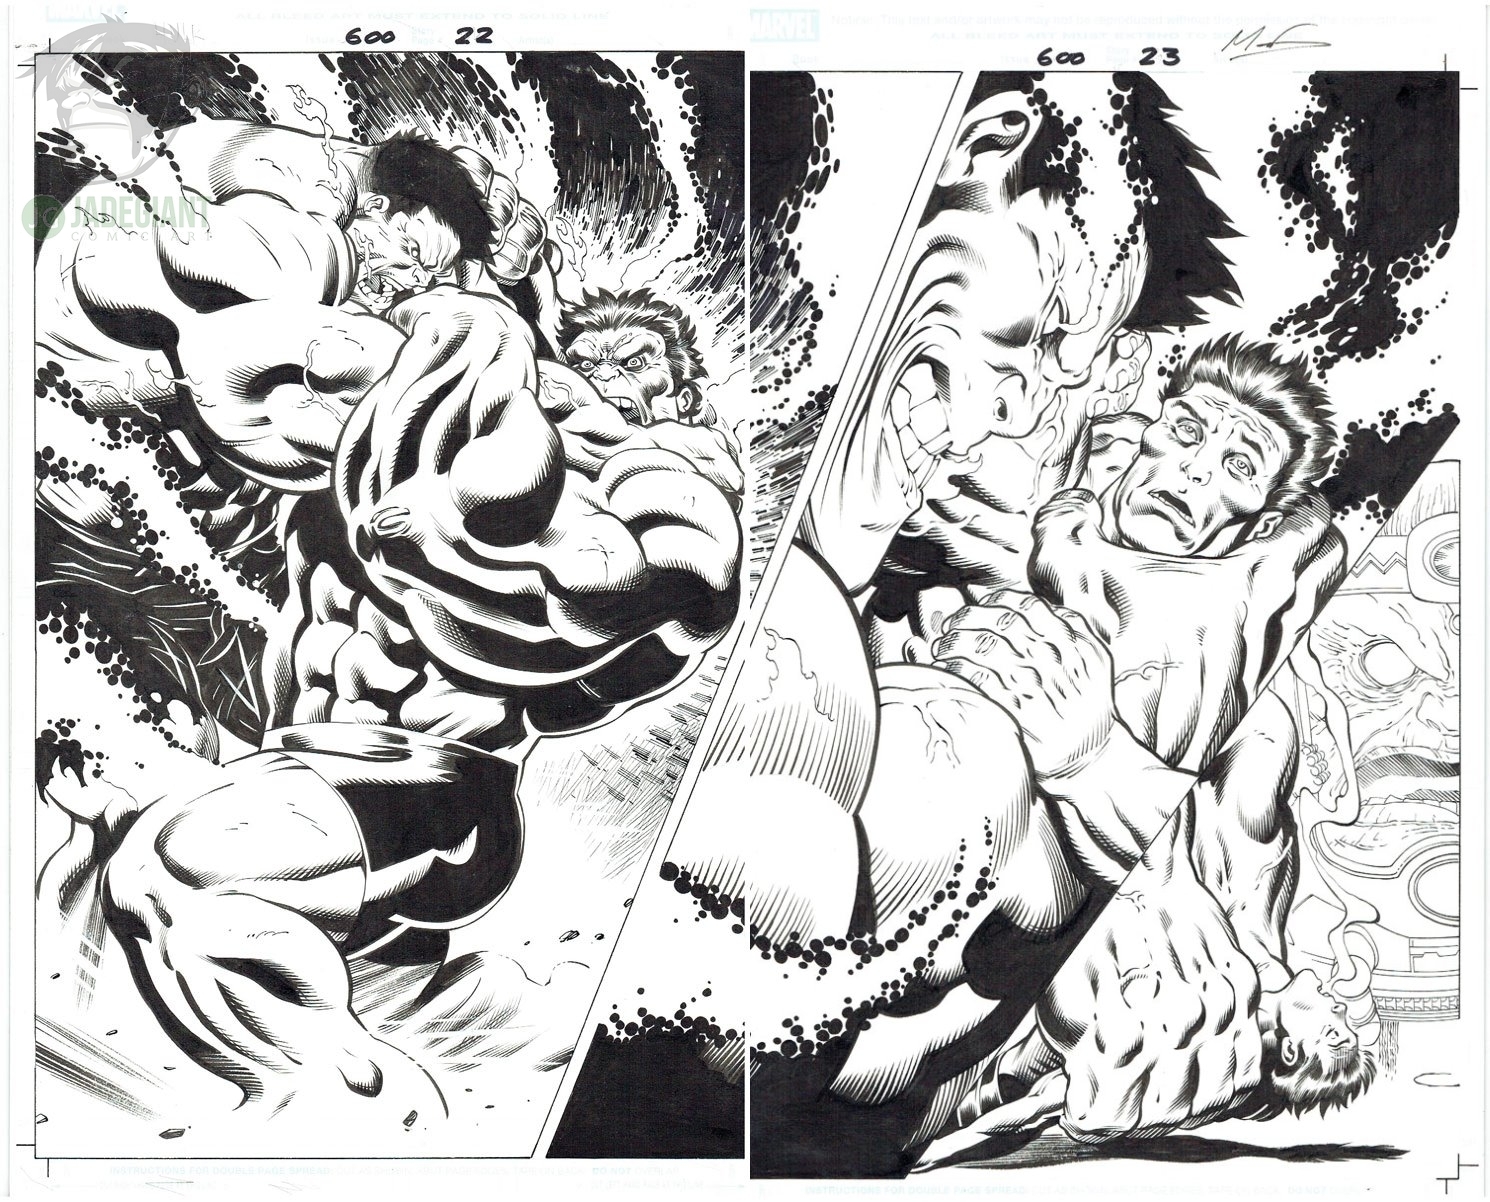 2009 Incredible Hulk 600 pages 22 and 23 DPS by Ed McGuinness and Mark Farmer Comic Art